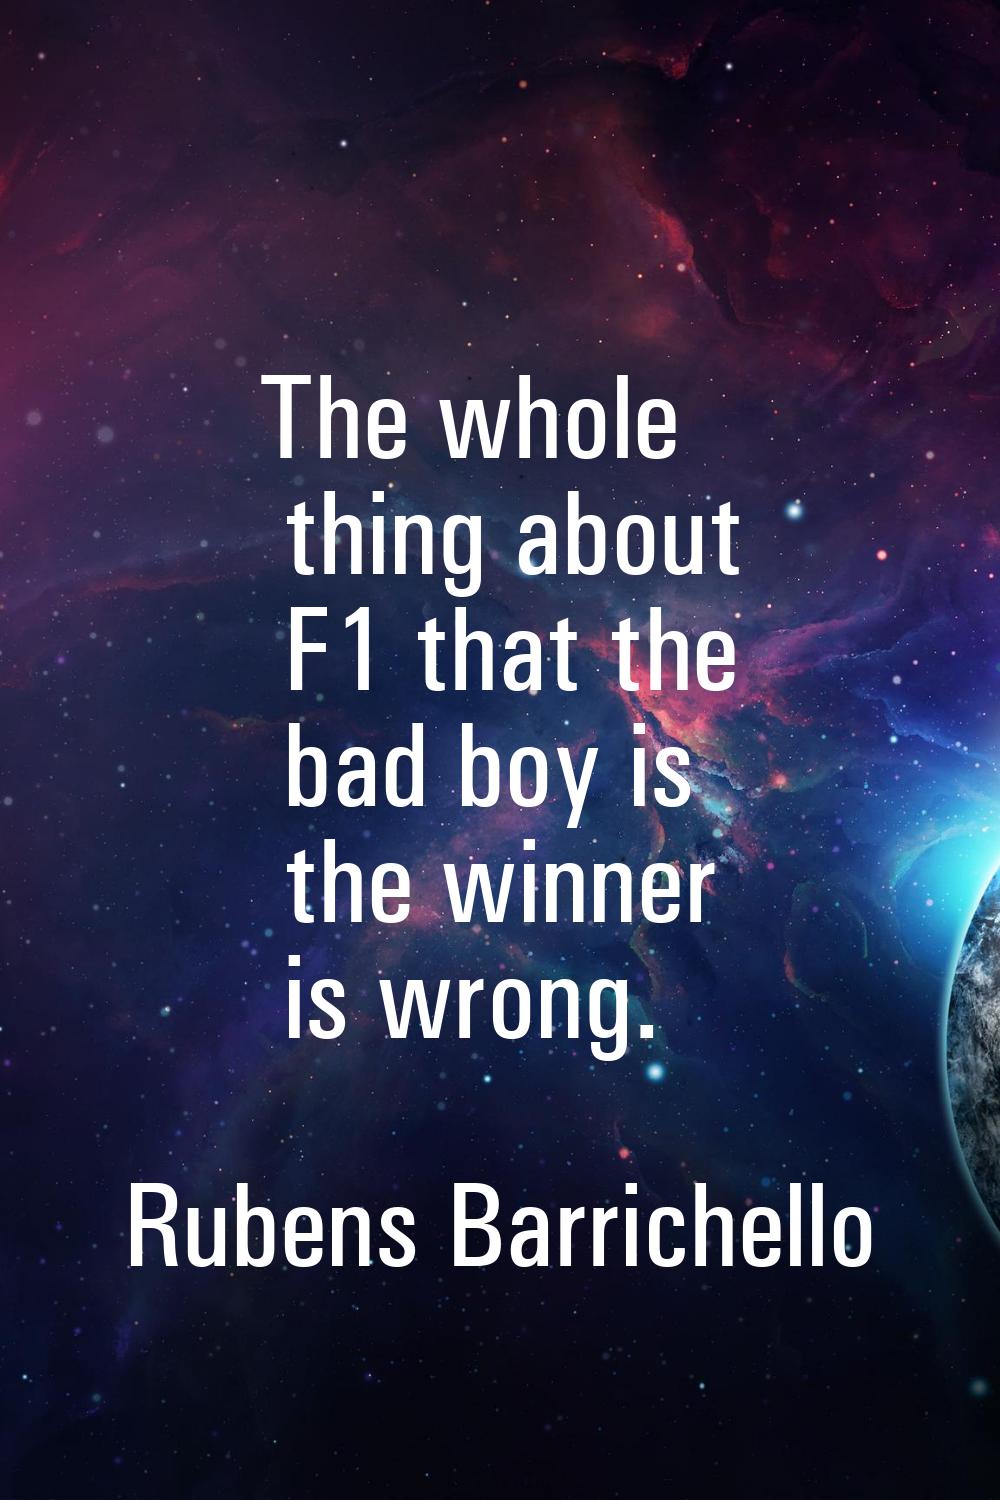 The whole thing about F1 that the bad boy is the winner is wrong.